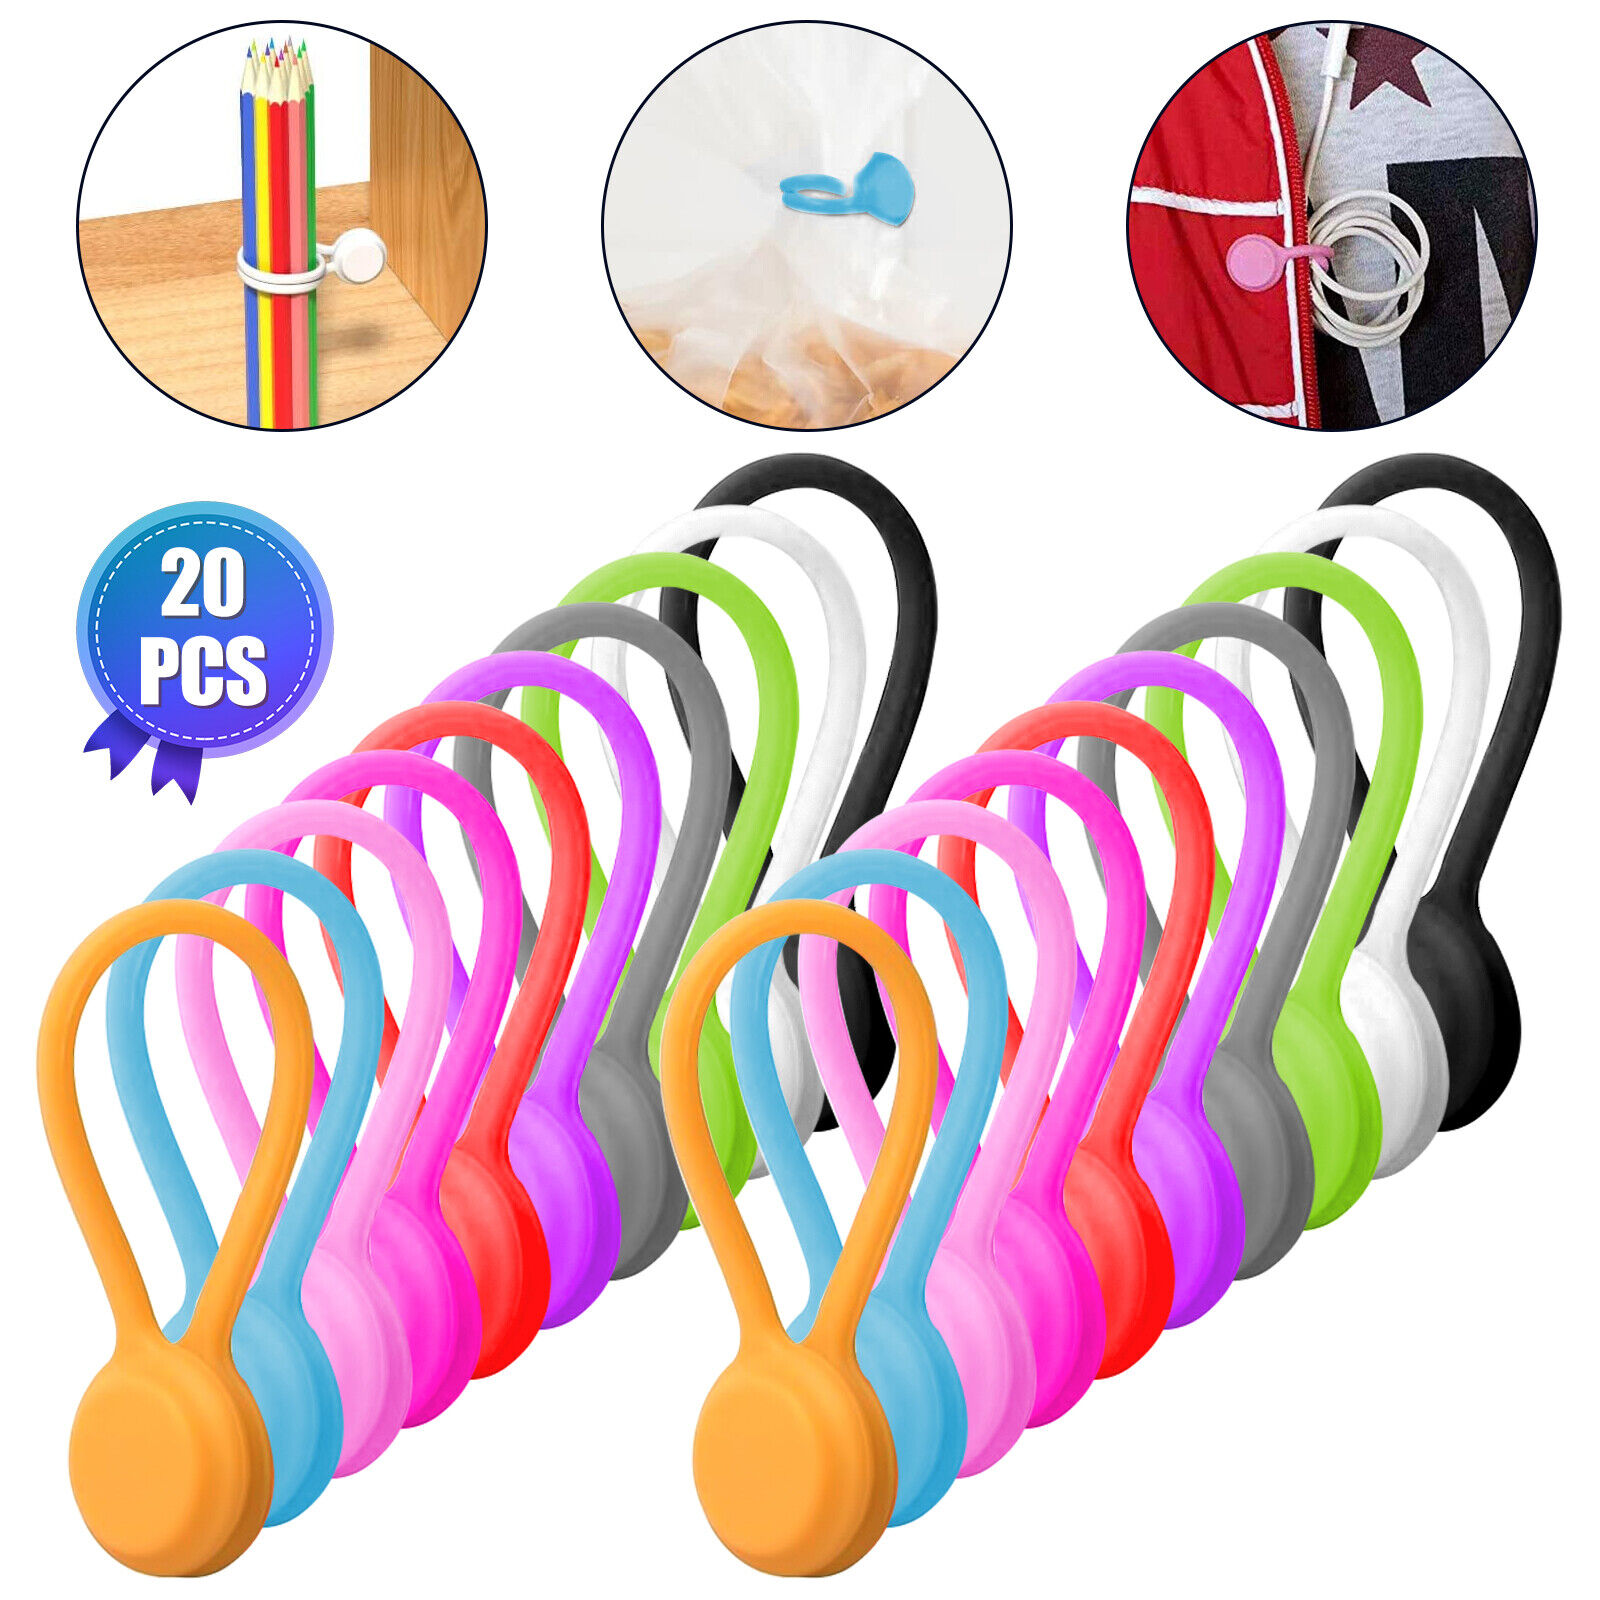 20Pcs Reusable Silicone Cable Ties 4.3in Magnetic Cable Organizers Cords Keeper